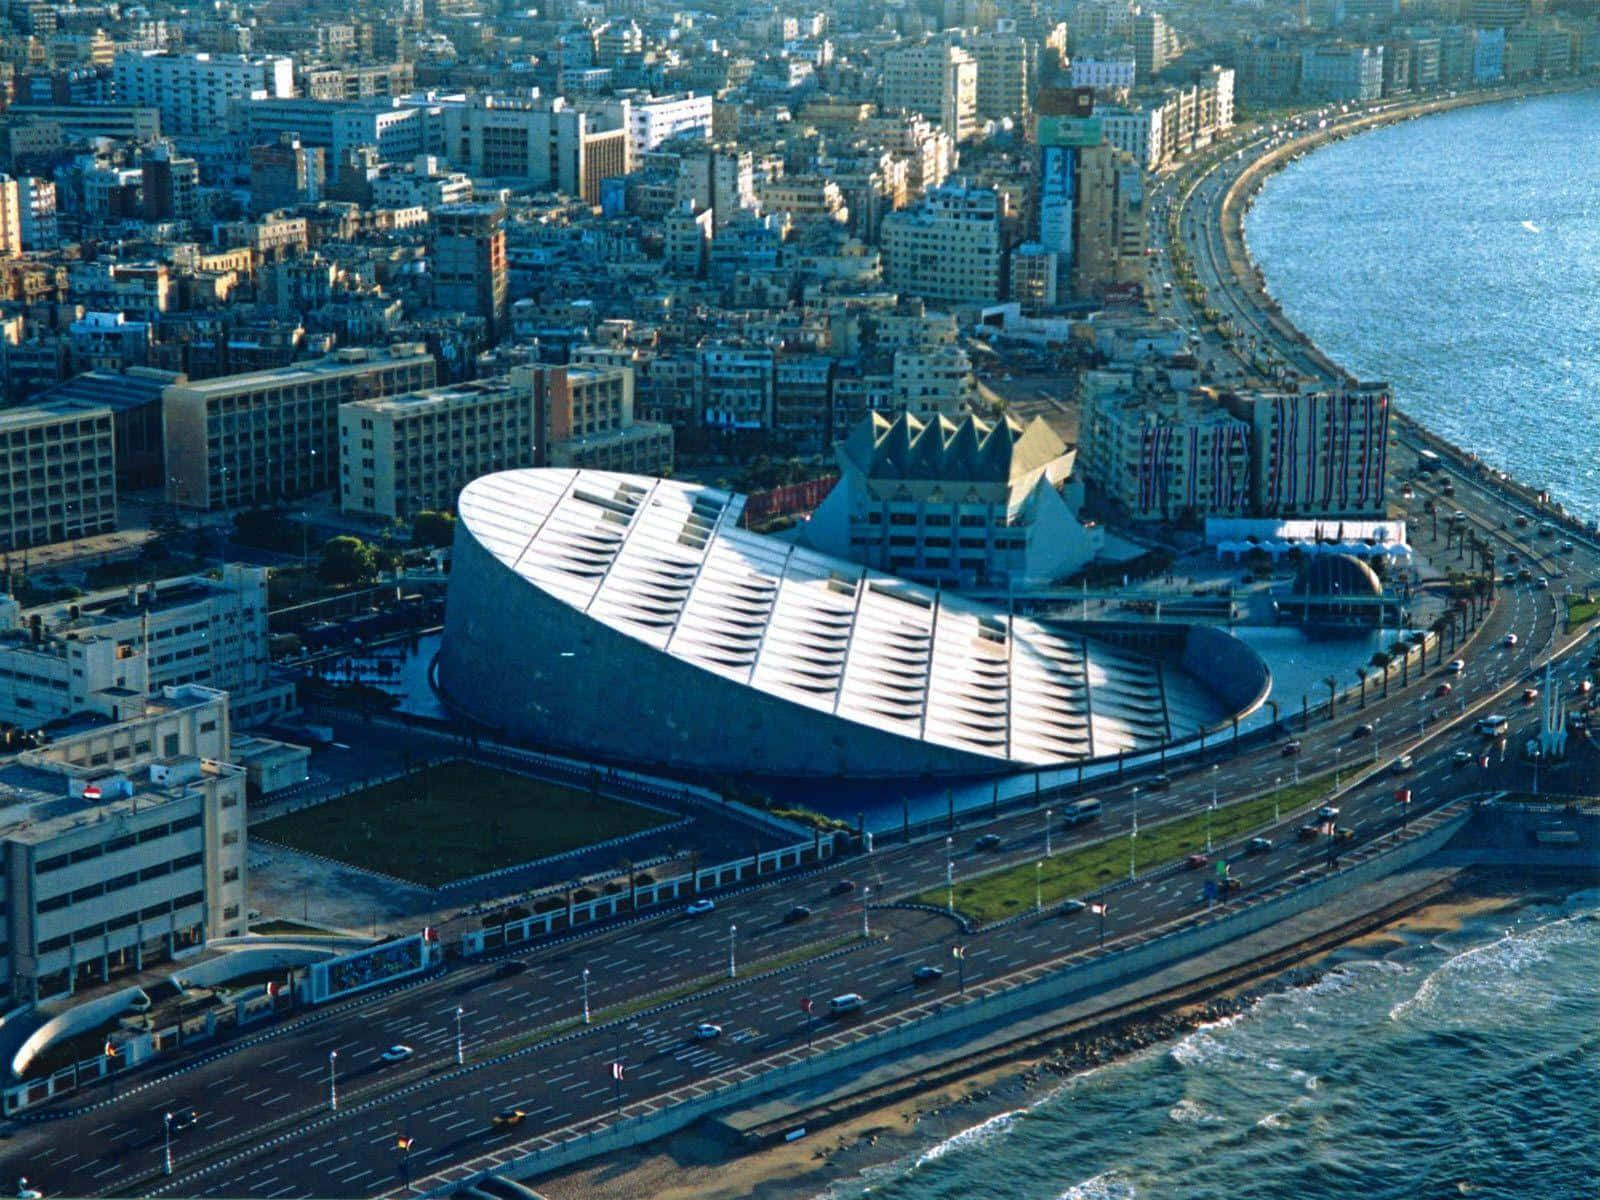 A Building With A Large Curved Roof Near The Ocean